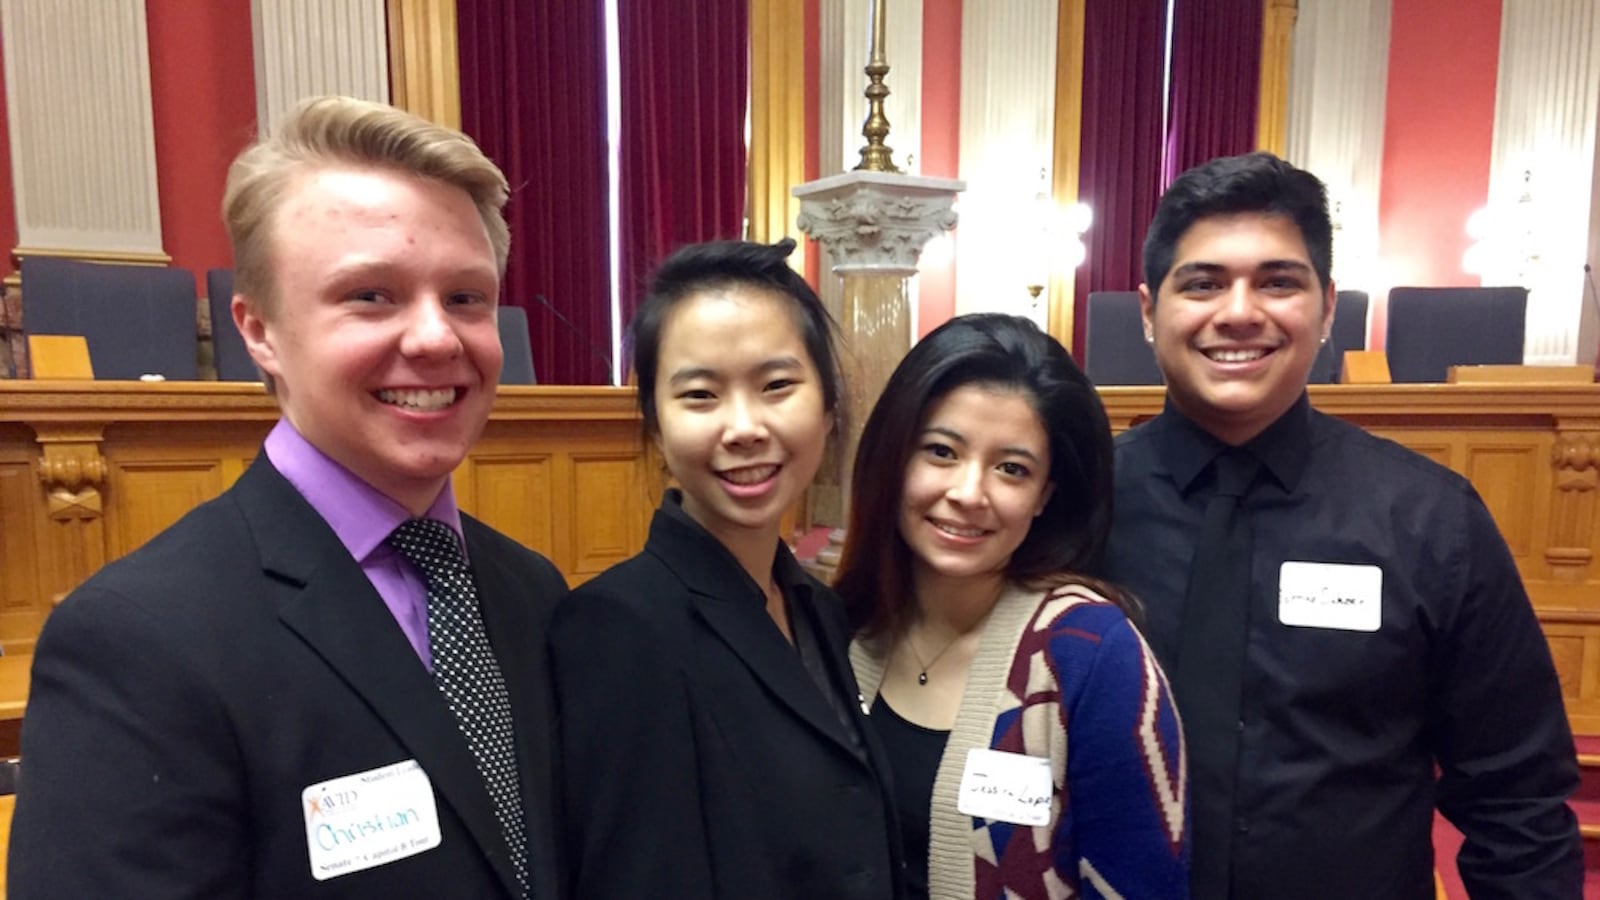 Colorado high school students Christian Sunblade, Myduyen Nguyen, Jessica Lopez and Santino Salazar met at the Colorado Capitol Wednesday to share information about the AVID college prep program with lawmakers.